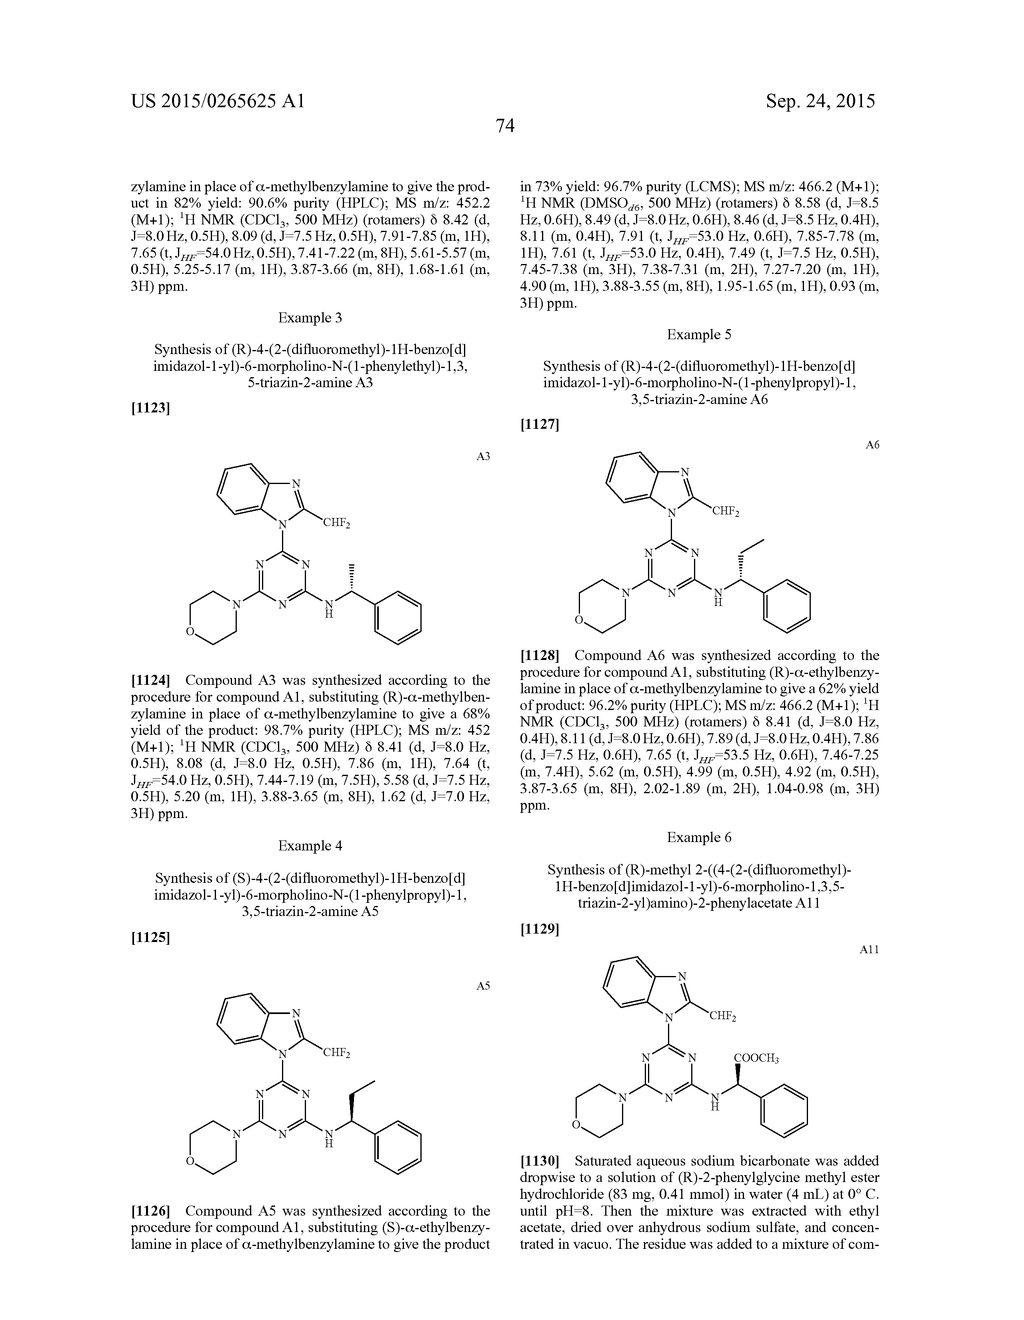 (ALPHA-SUBSTITUTED ARALKYLAMINO AND HETEROARYLALKYLAMINO) PYRIMIDINYL AND     1,3,5-TRIAZINYL BENZIMIDAZOLES, PHARMACEUTICAL COMPOSITIONS THEREOF, AND     THEIR USE IN TREATING PROLIFERATIVE DISEASES - diagram, schematic, and image 75